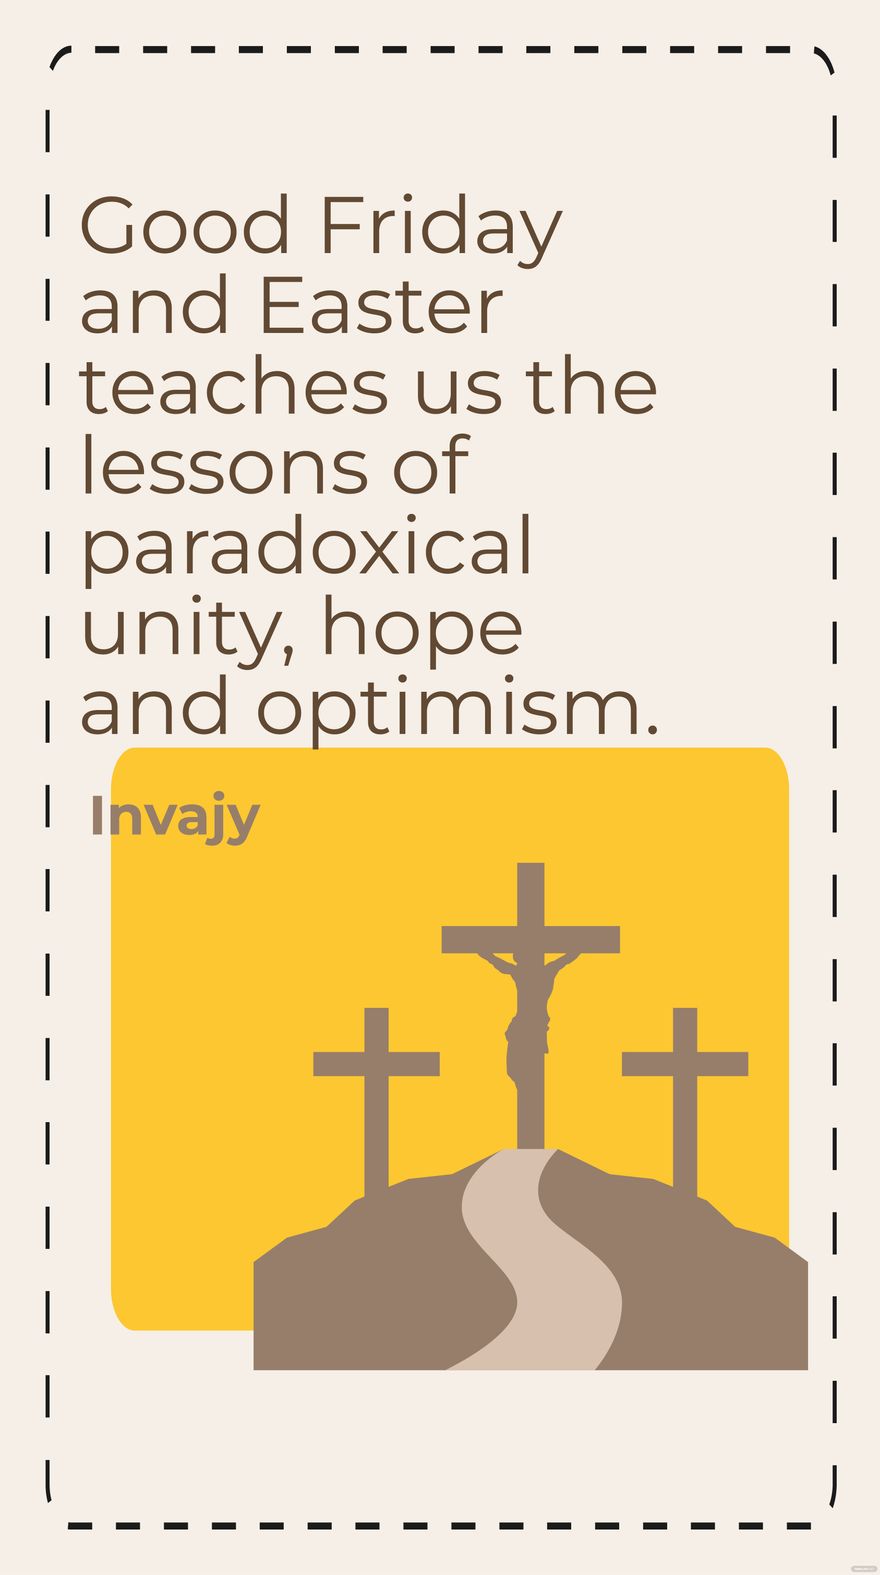 Invajy - Good Friday and Easter teaches us the lessons of paradoxical unity, hope and optimism.